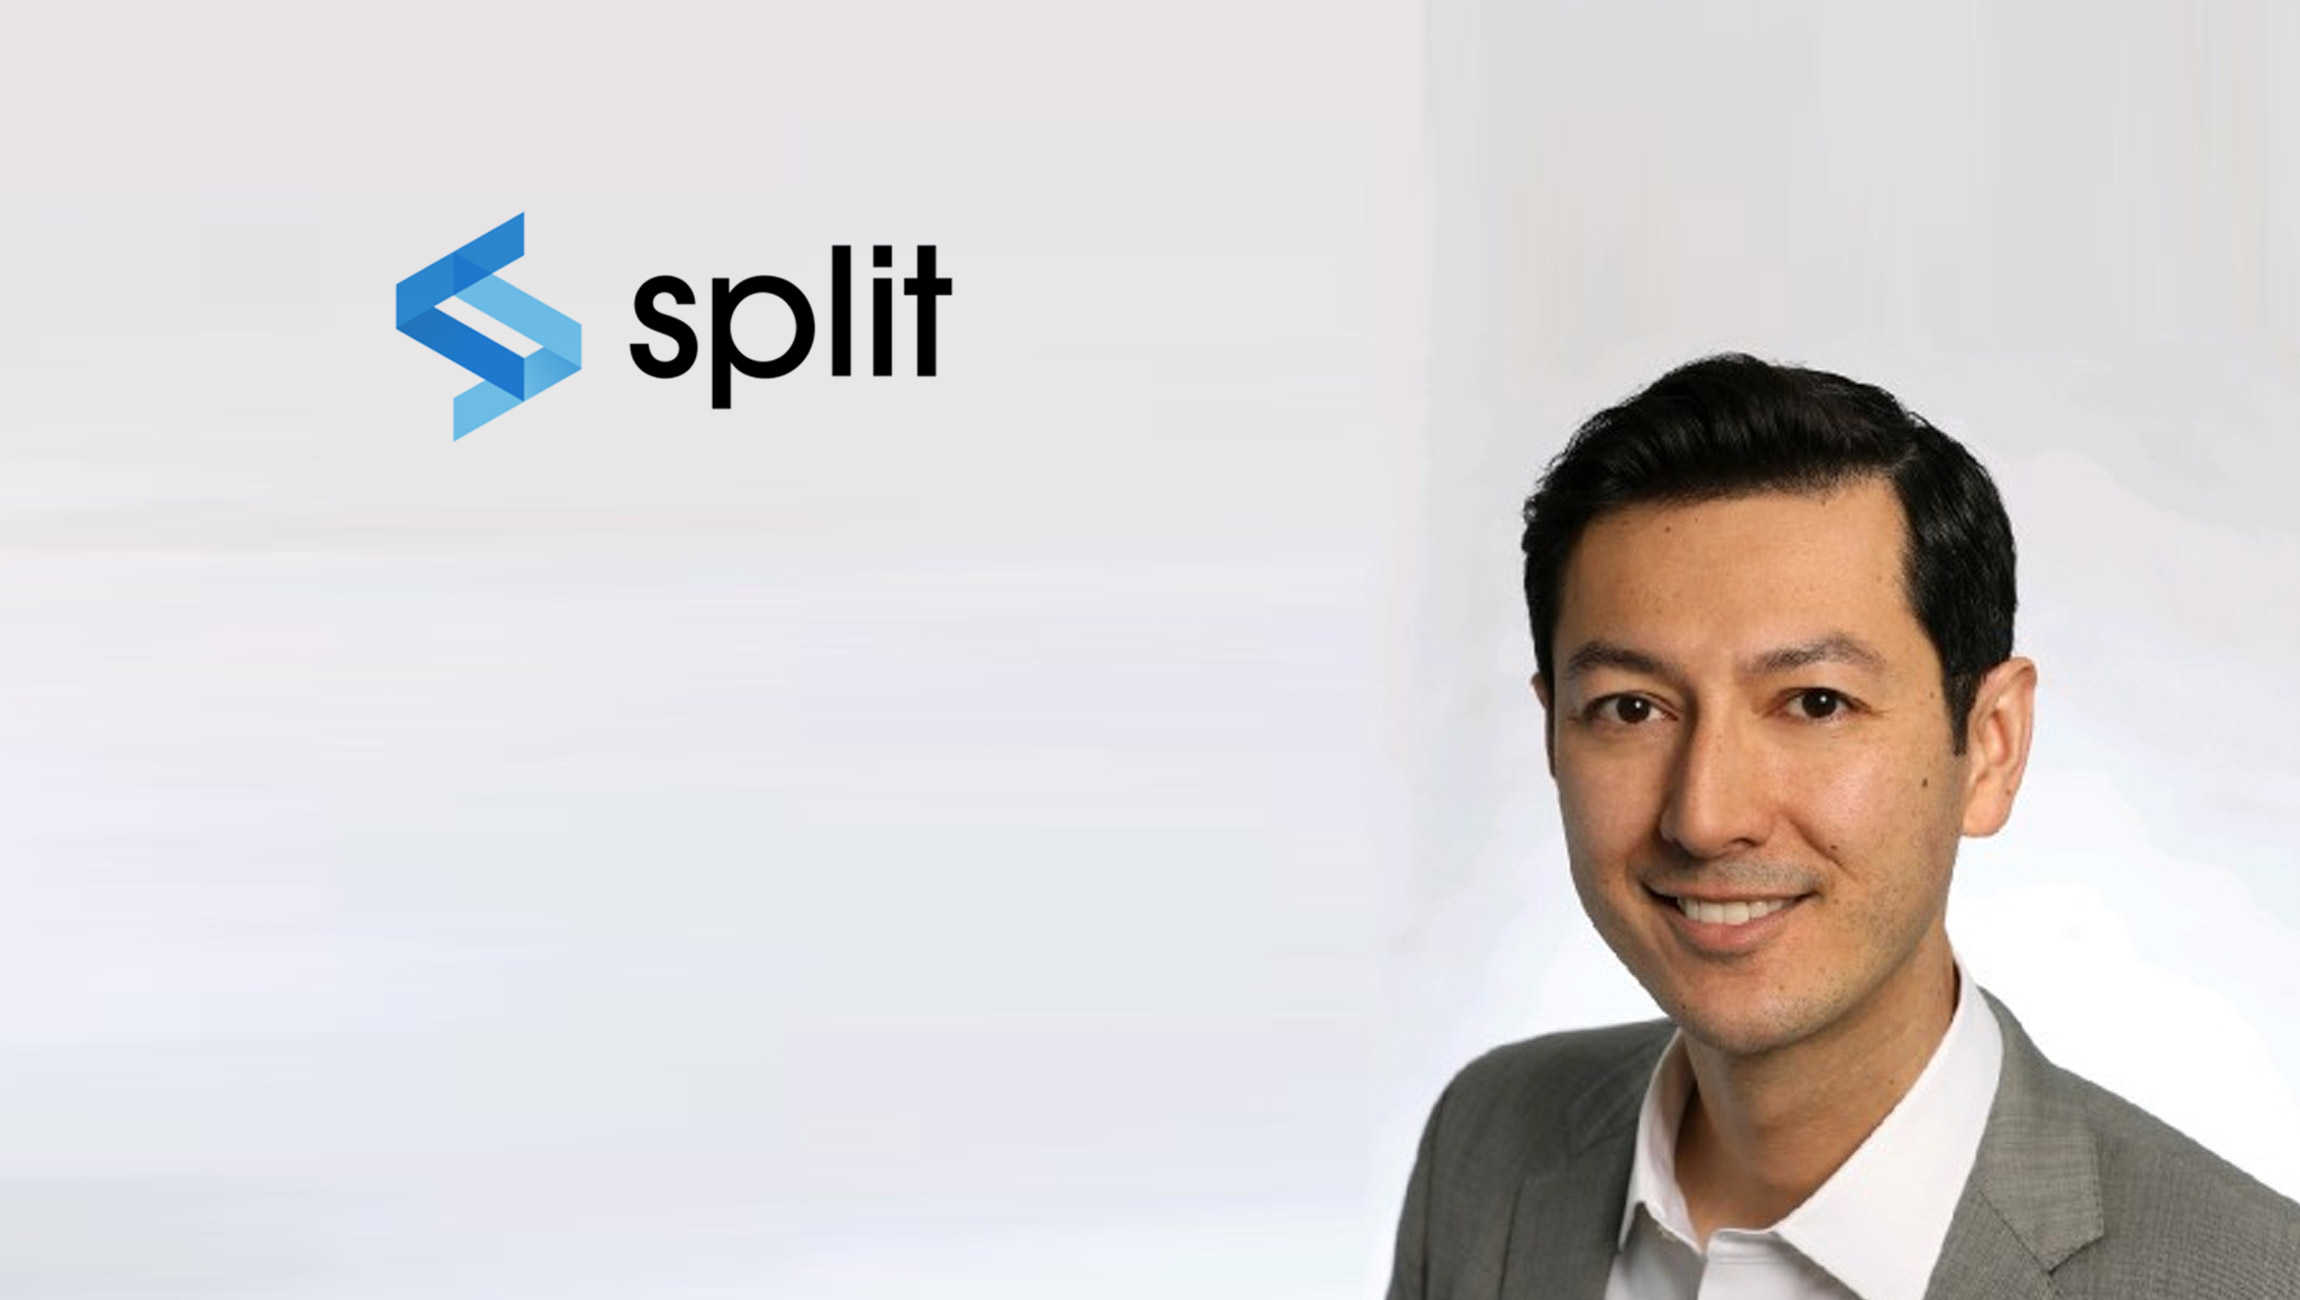 Split Welcomes Aaron Ballew As Chief Marketing Officer